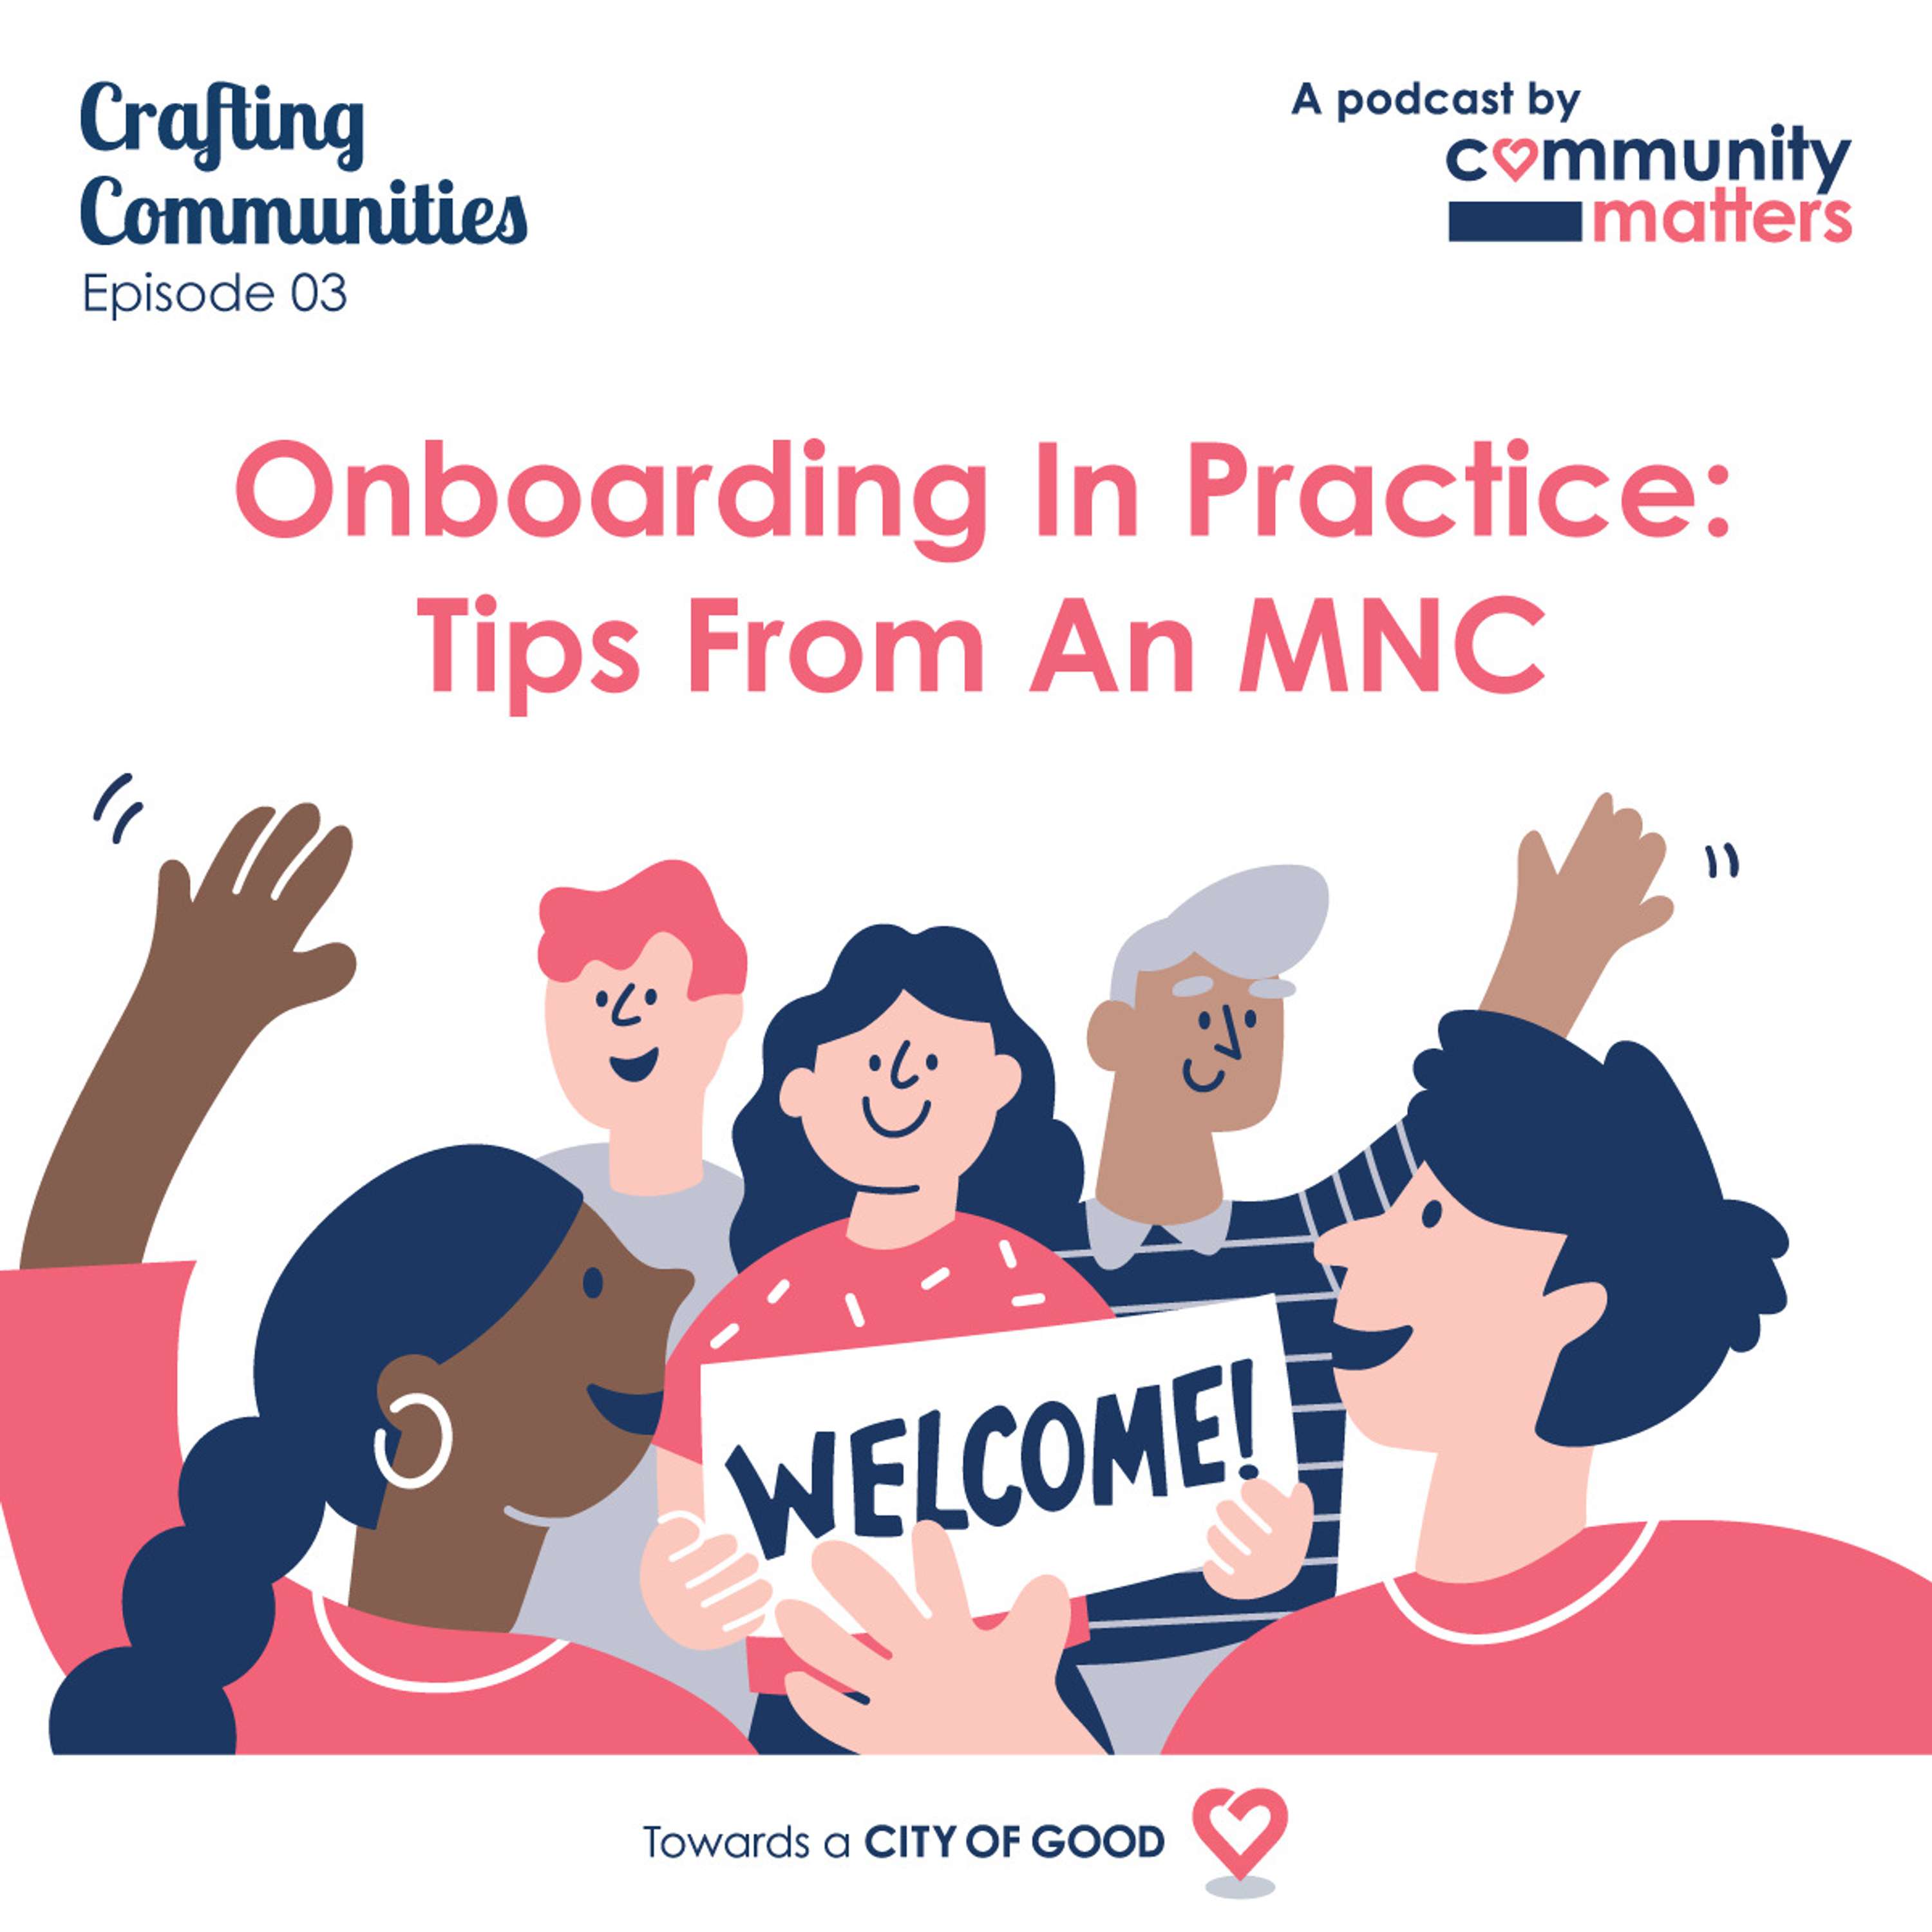 Onboarding In Practice: Tips From An MNC